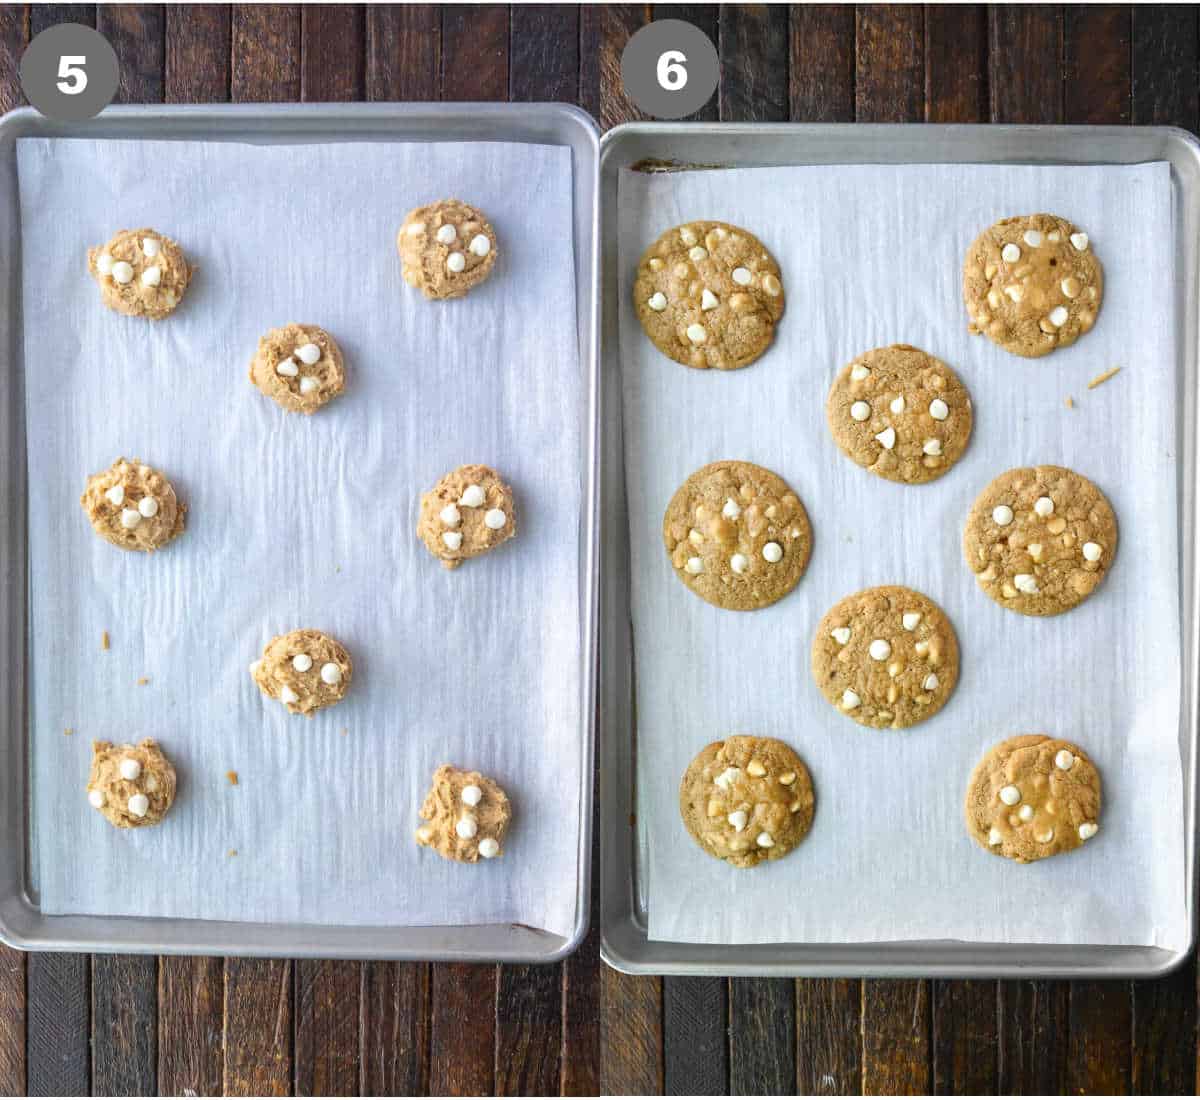 Steps 5 and 6 for making macadamia nut cookies.